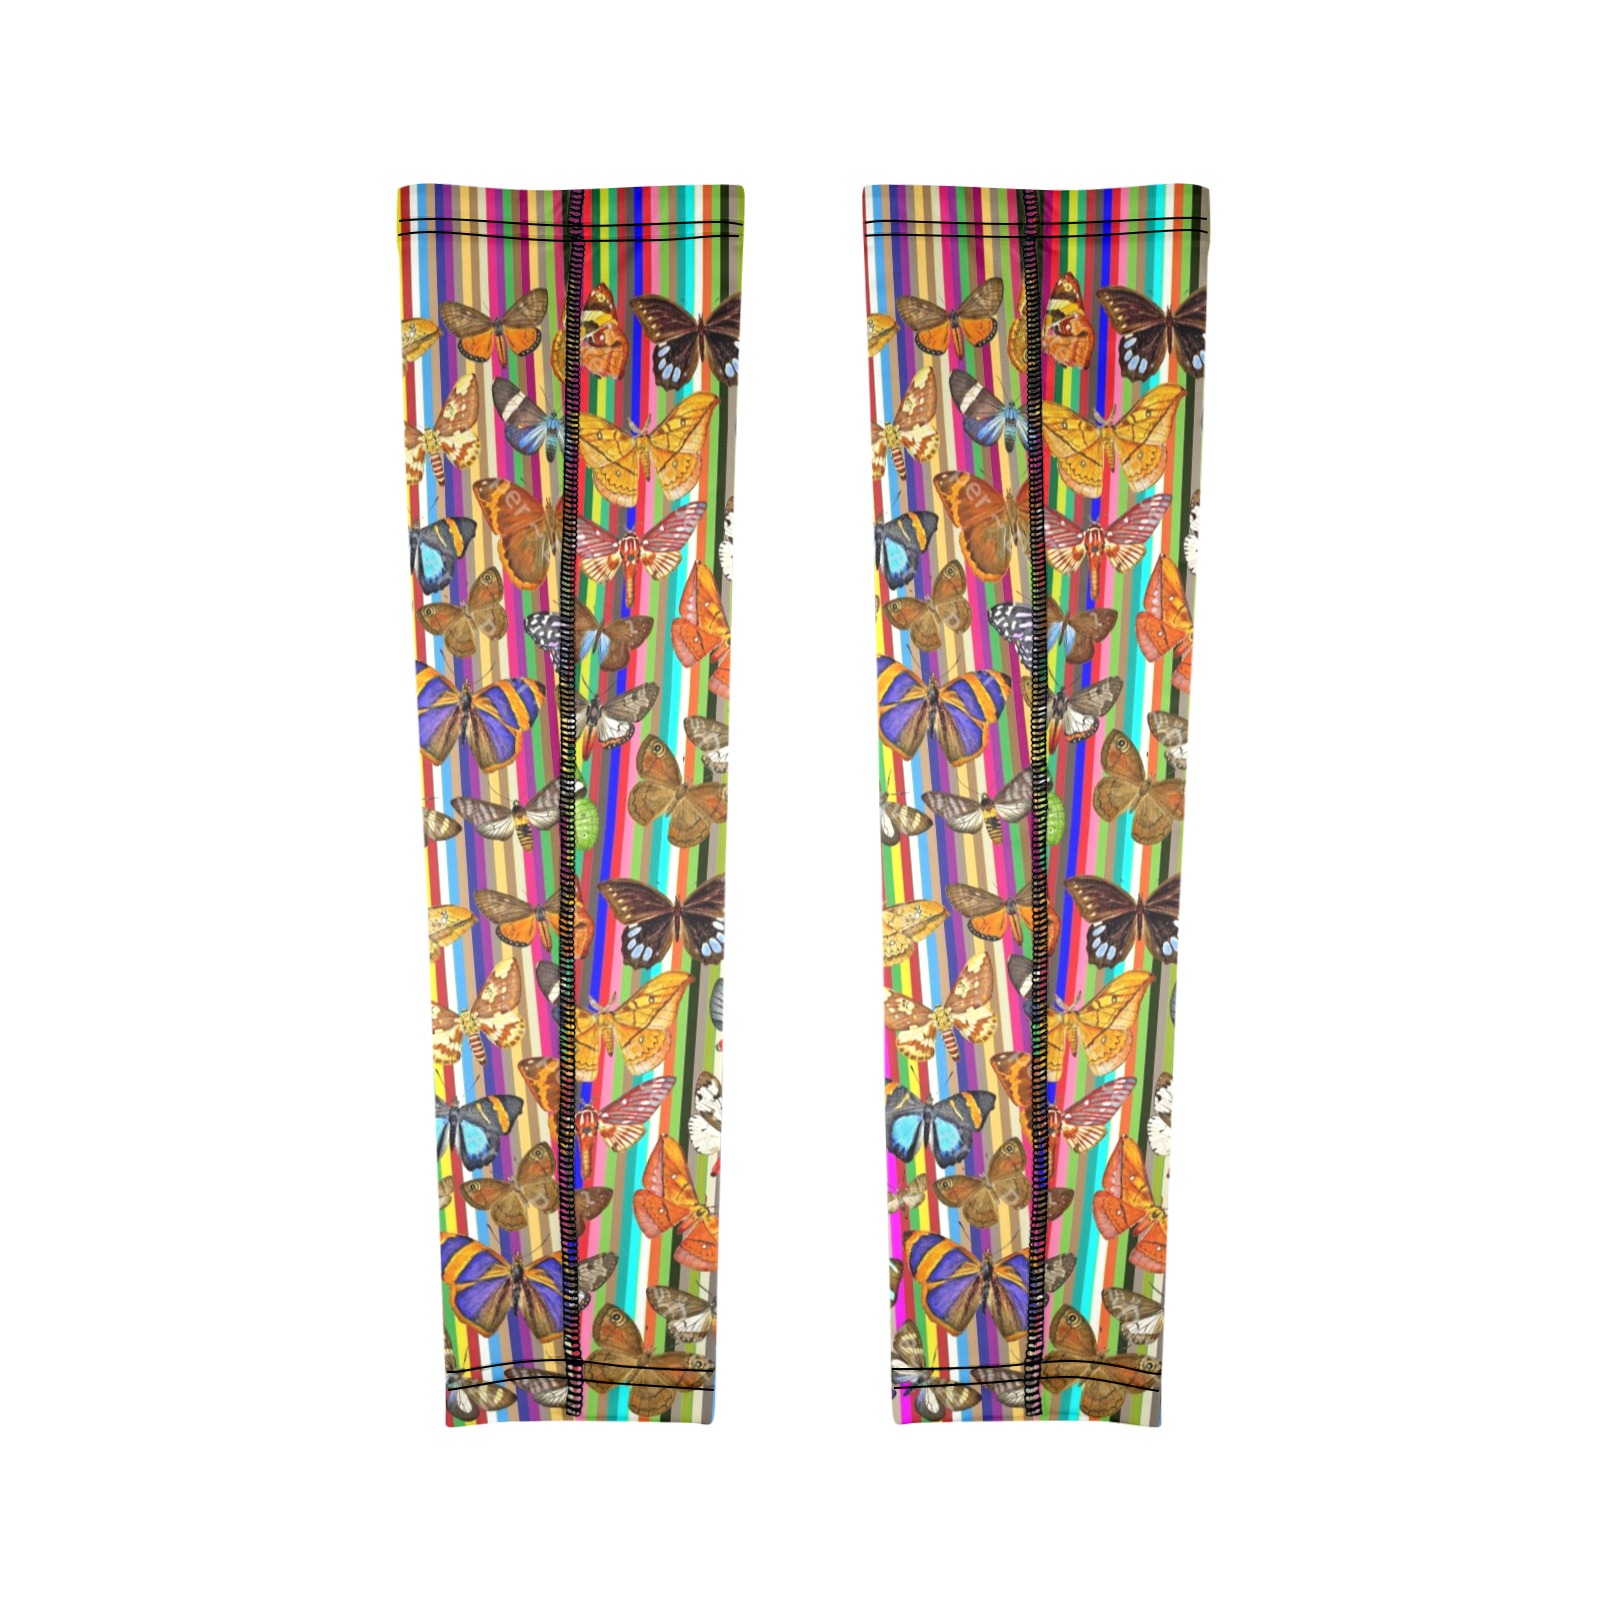 Rainbow  Butterflies Arm Sleeves (Set of Two with Different Printings)